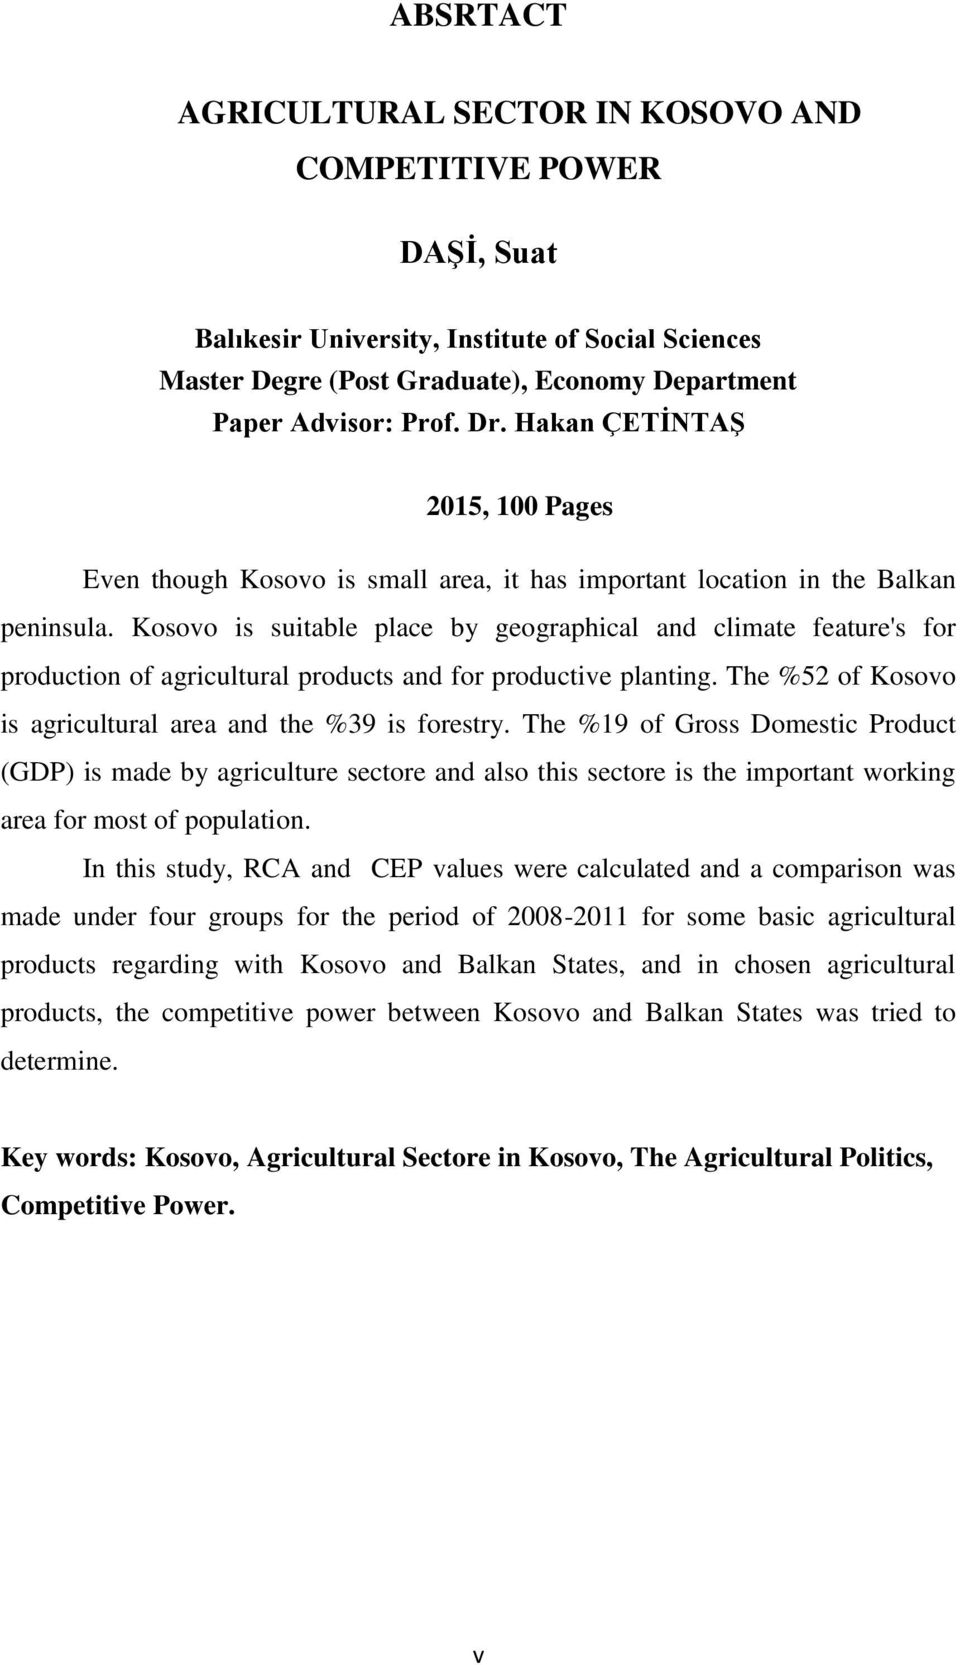 Kosovo is suitable place by geographical and climate feature's for production of agricultural products and for productive planting. The %52 of Kosovo is agricultural area and the %39 is forestry.